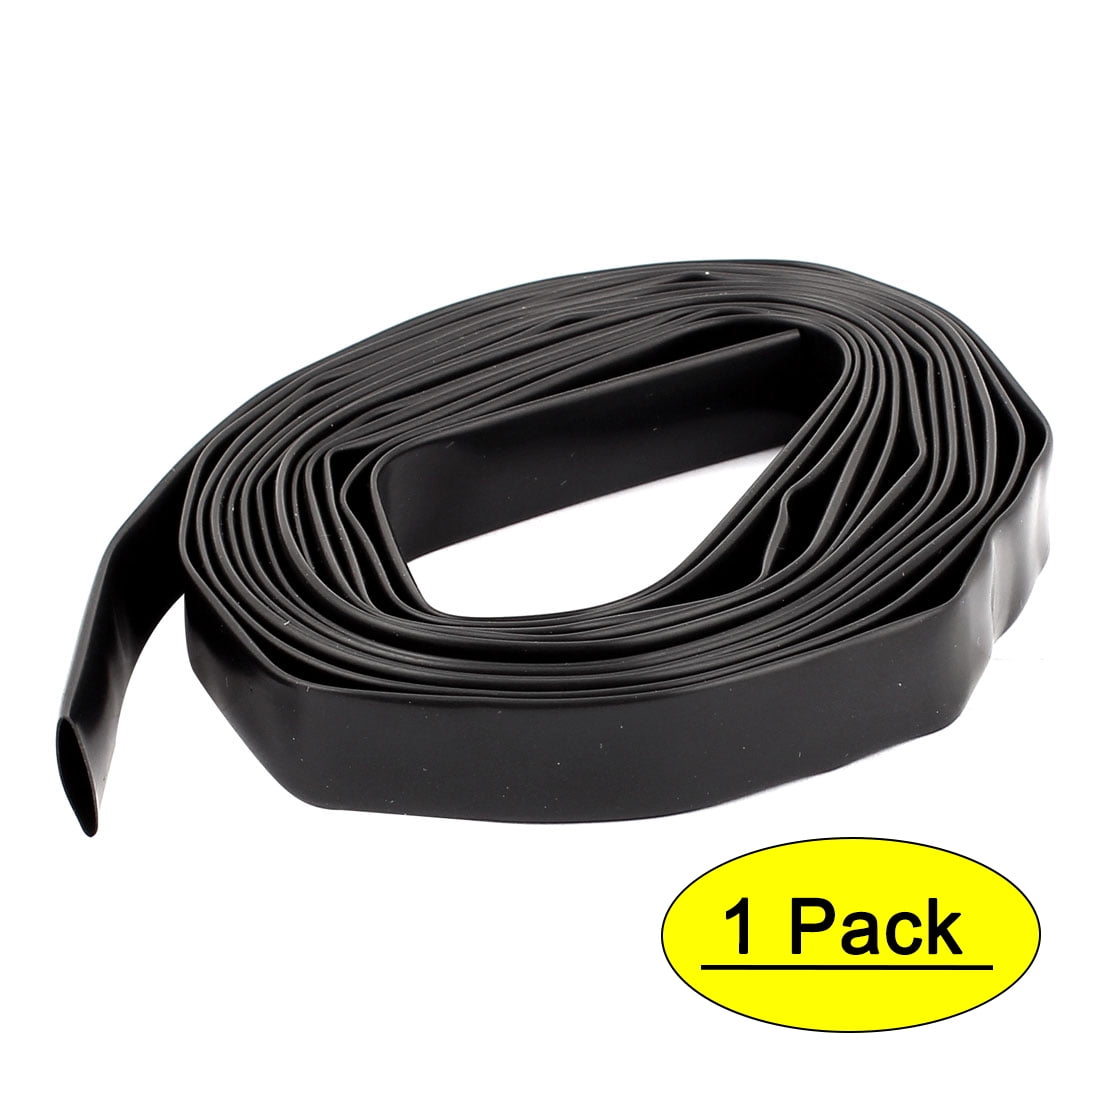 10mm Dia 9.8Ft Ratio 2:1 Heat Shrink Tubing Shrinkable Black Polyolefin Insulation 3 Meters for Wire 